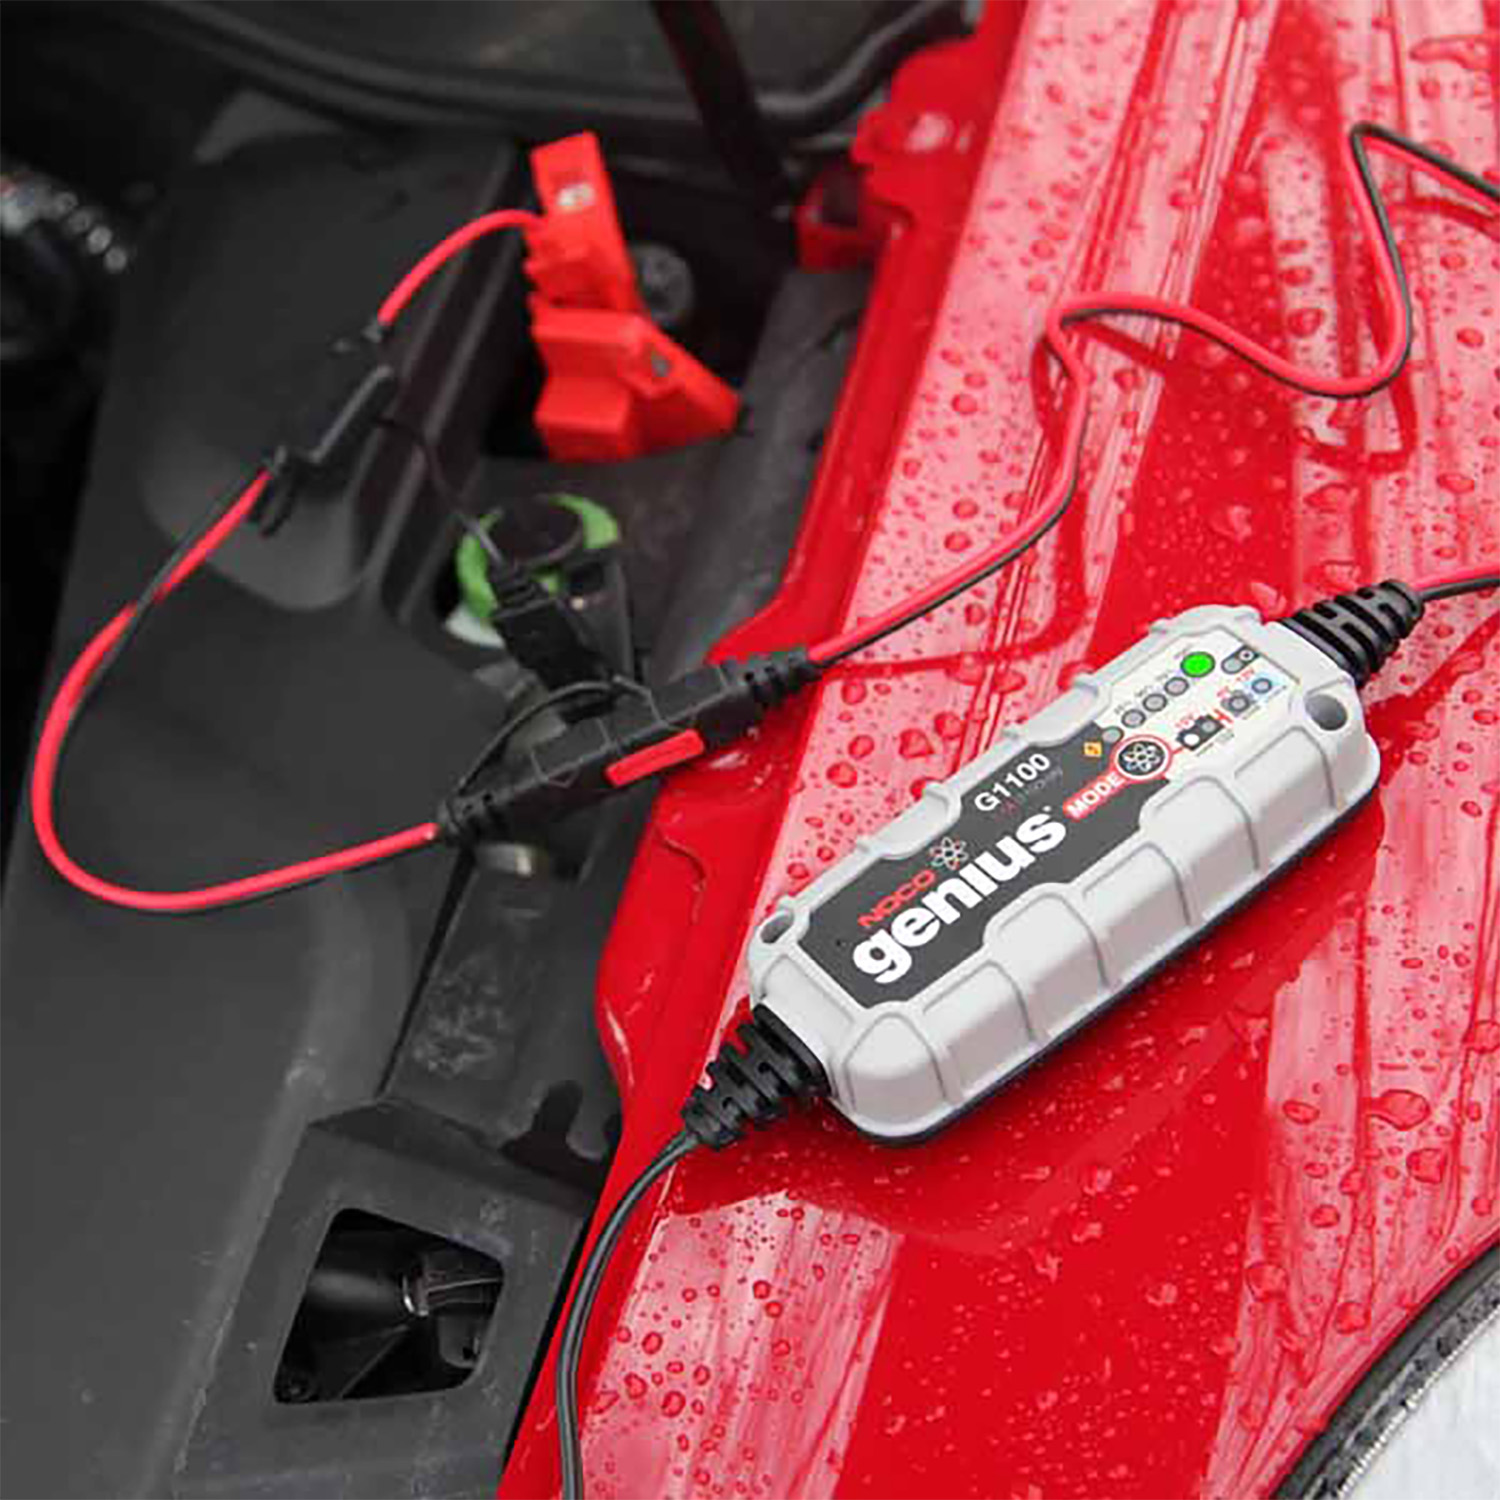 The All New Emergency Lithium Ion Car Battery Jump Starter and Portable Power Bank Booster Pack.